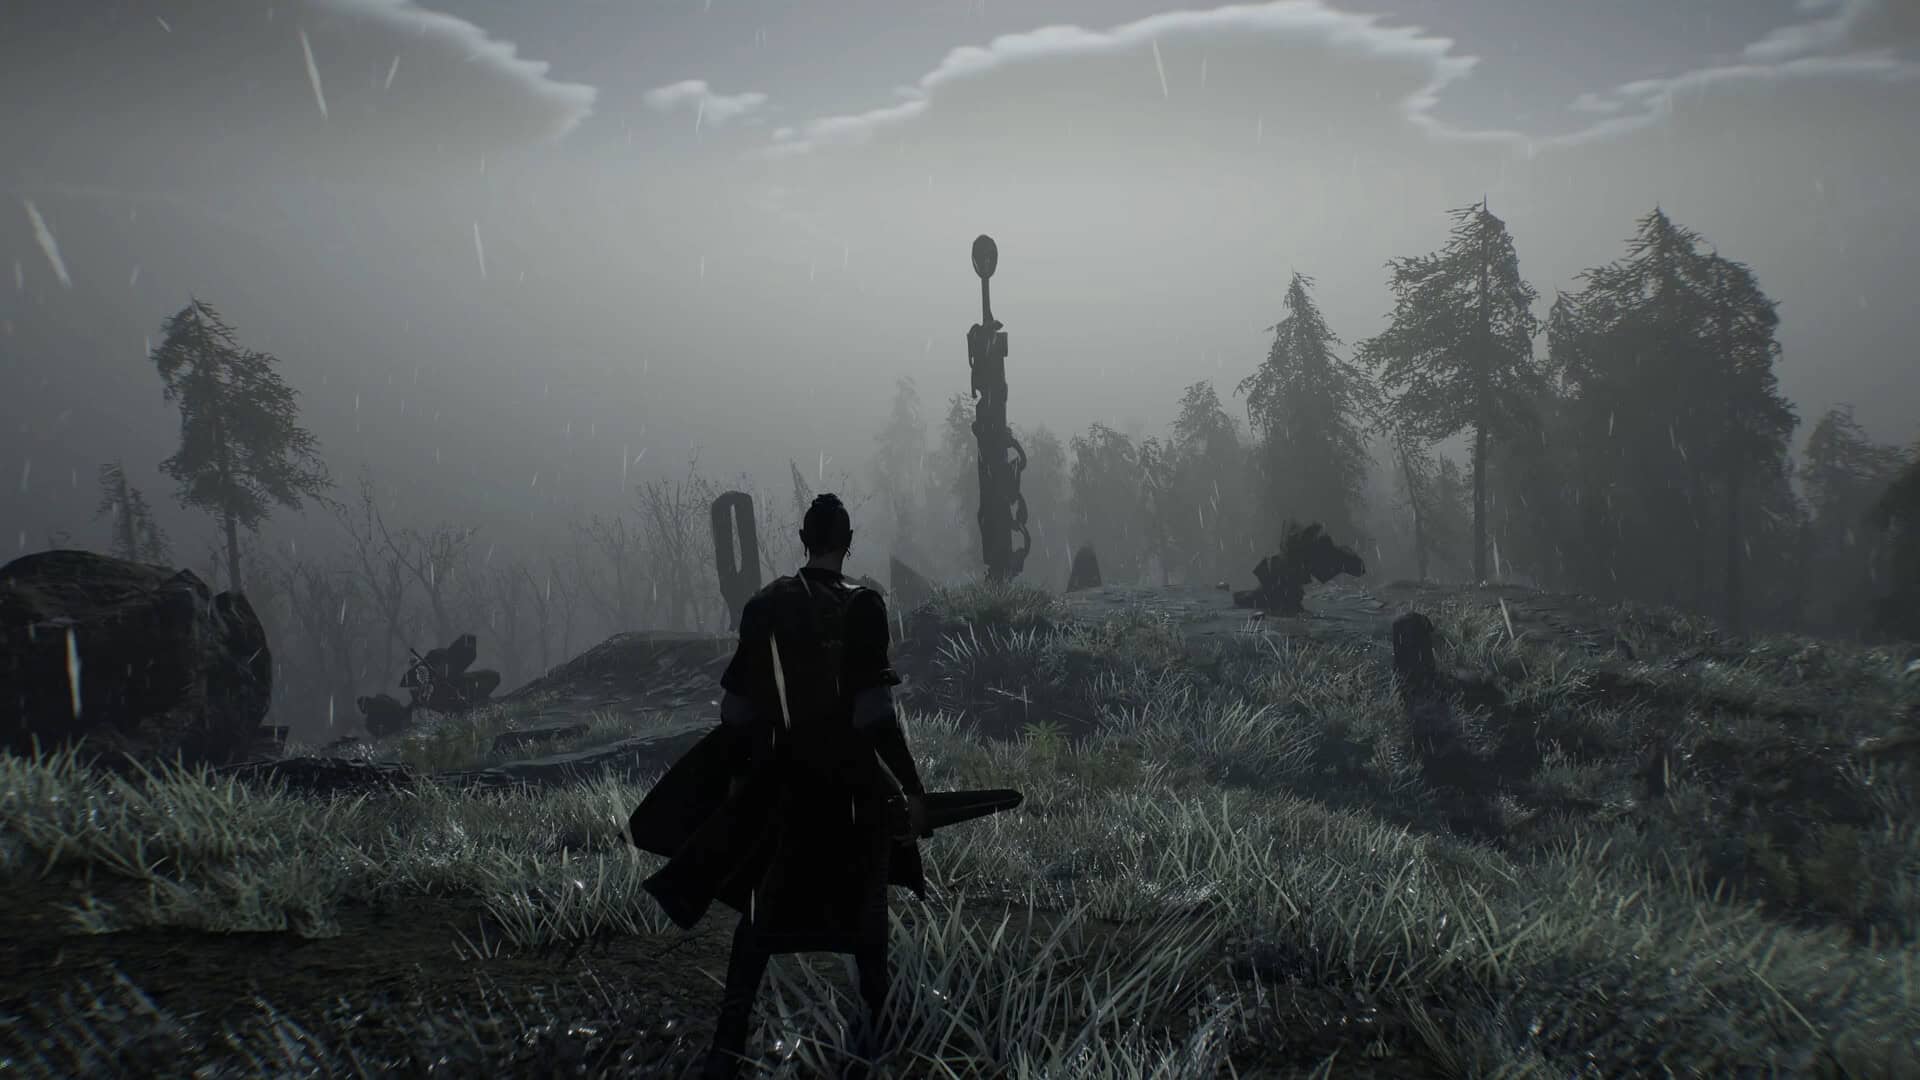 aska early access release date - a character stands with a sword ready in a gloomy setting